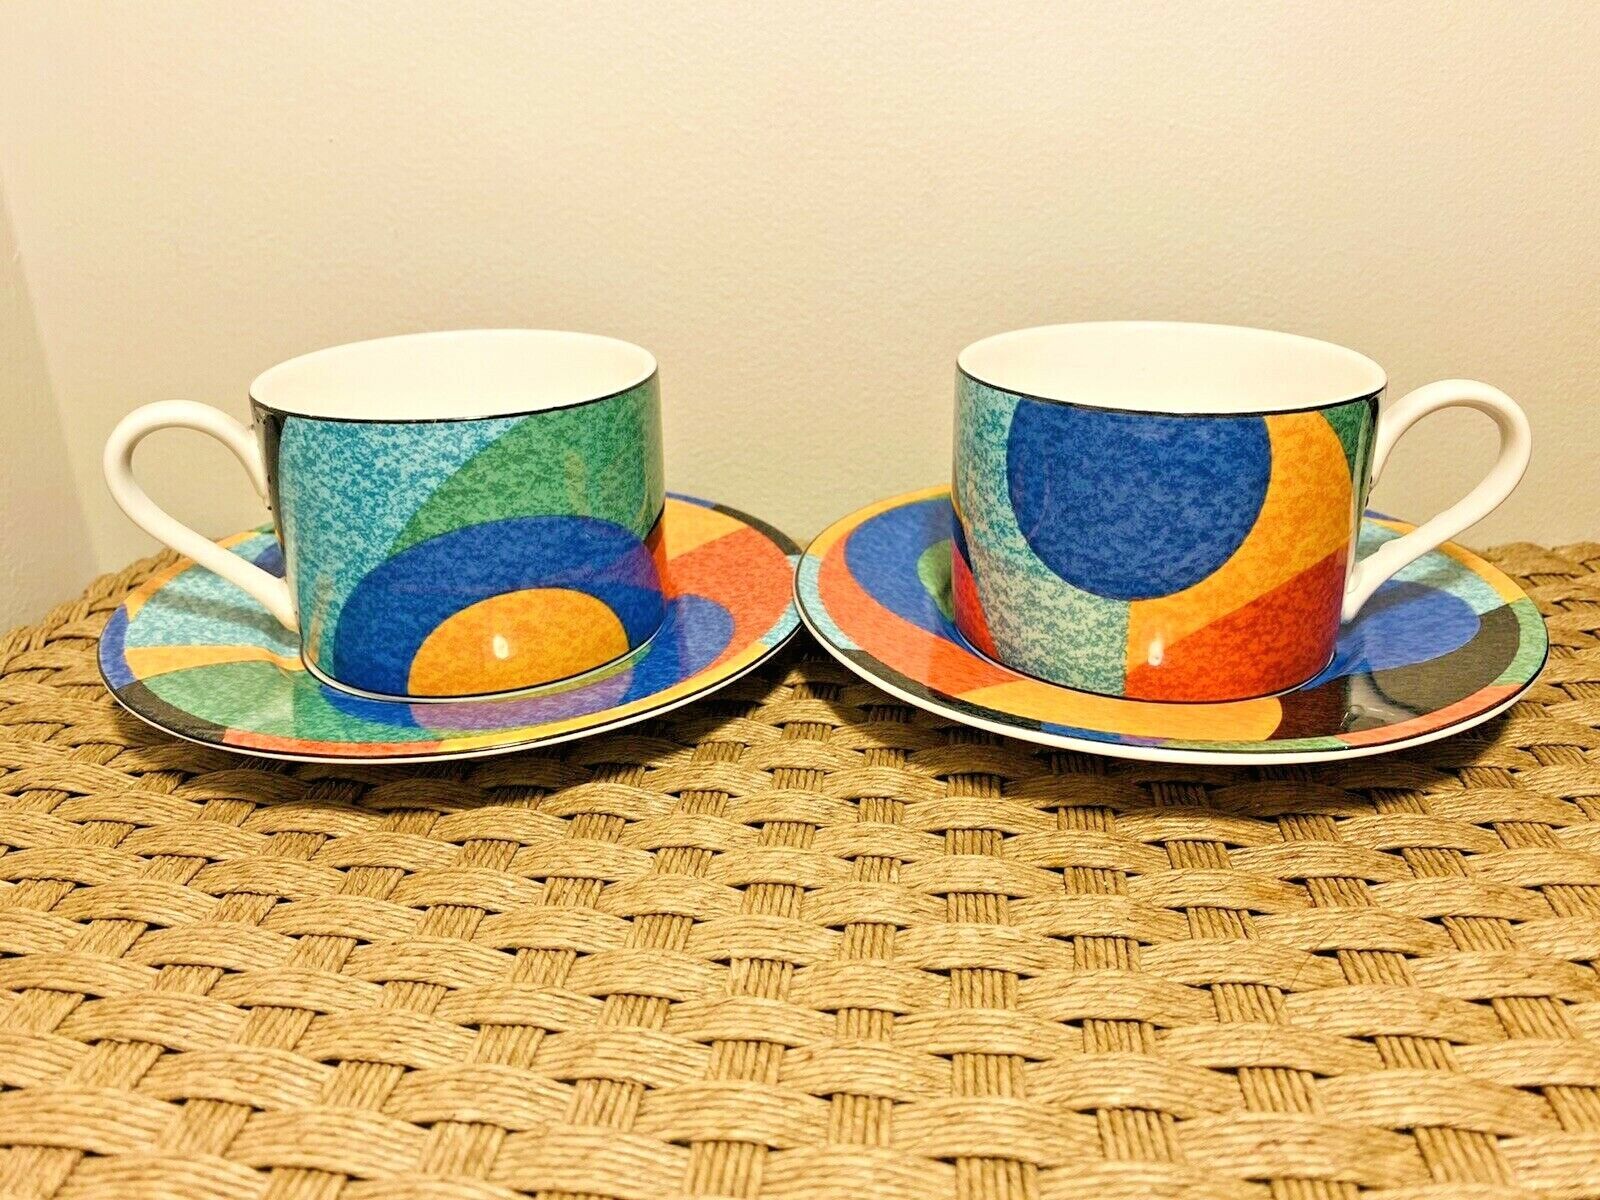 Set of 2 Victoria & Beale Accents  9019 Porcelain Coffee Tea Cups & Saucers